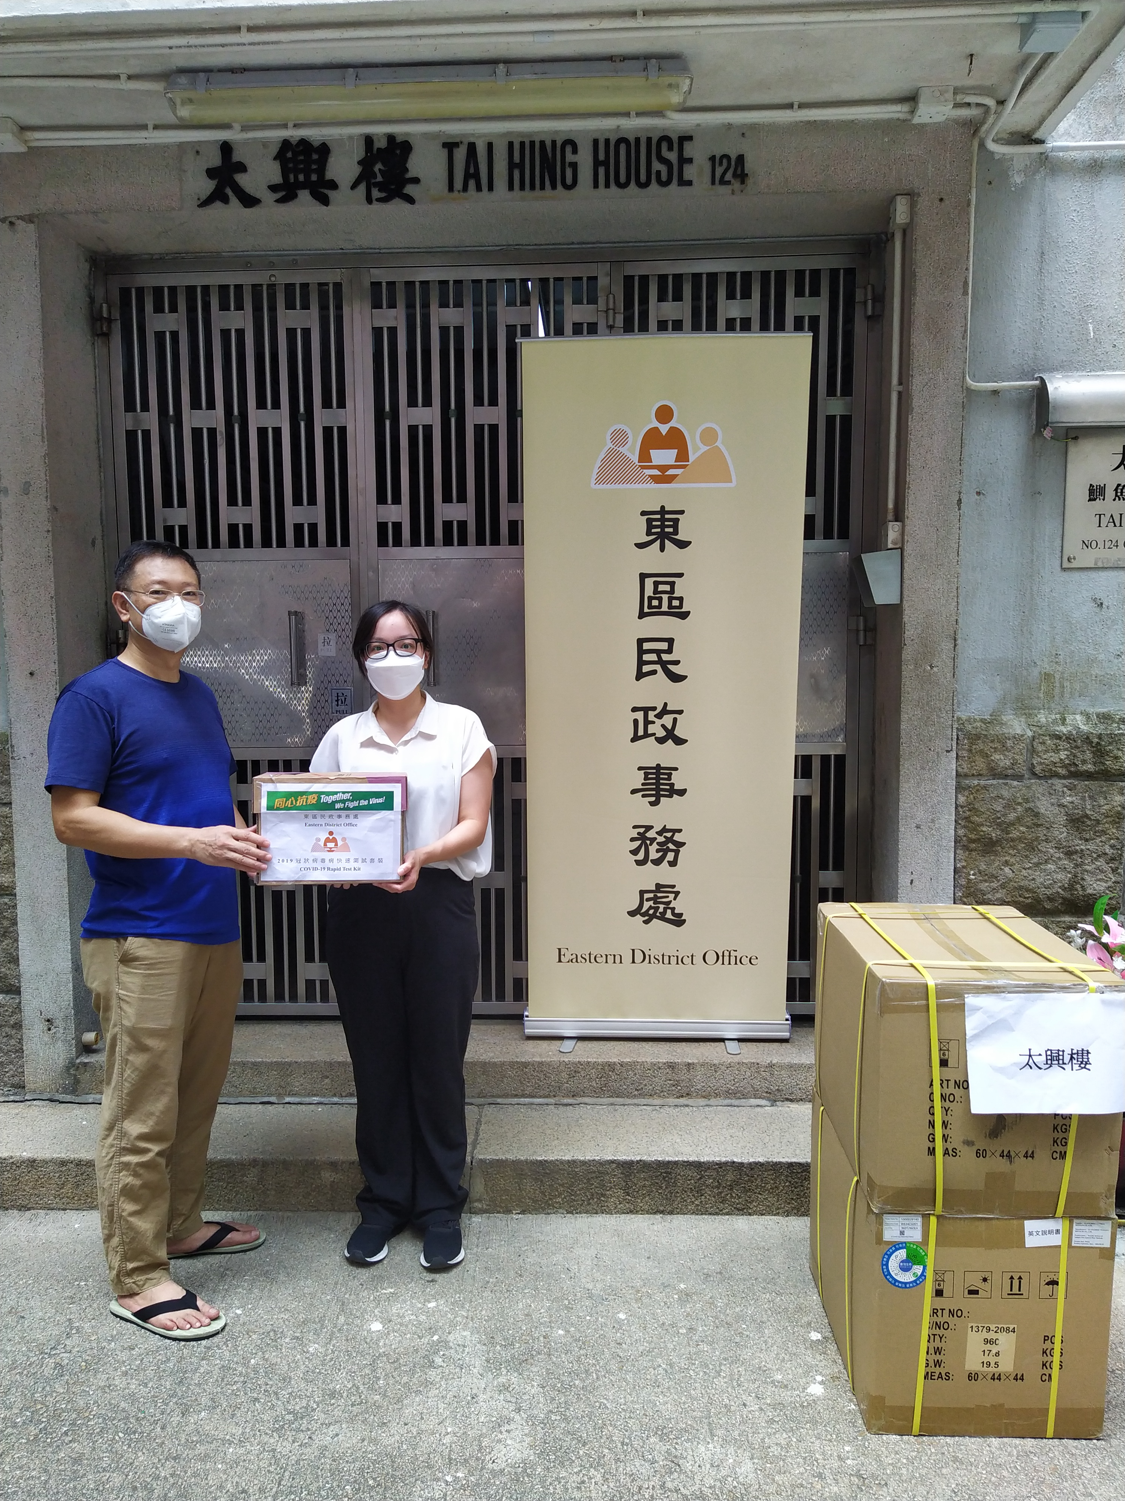 The Eastern District Office today (July 29) distributed COVID-19 rapid test kits to households, cleansing workers and property management staff living and working in Tai Hing House for voluntary testing through the property management company.